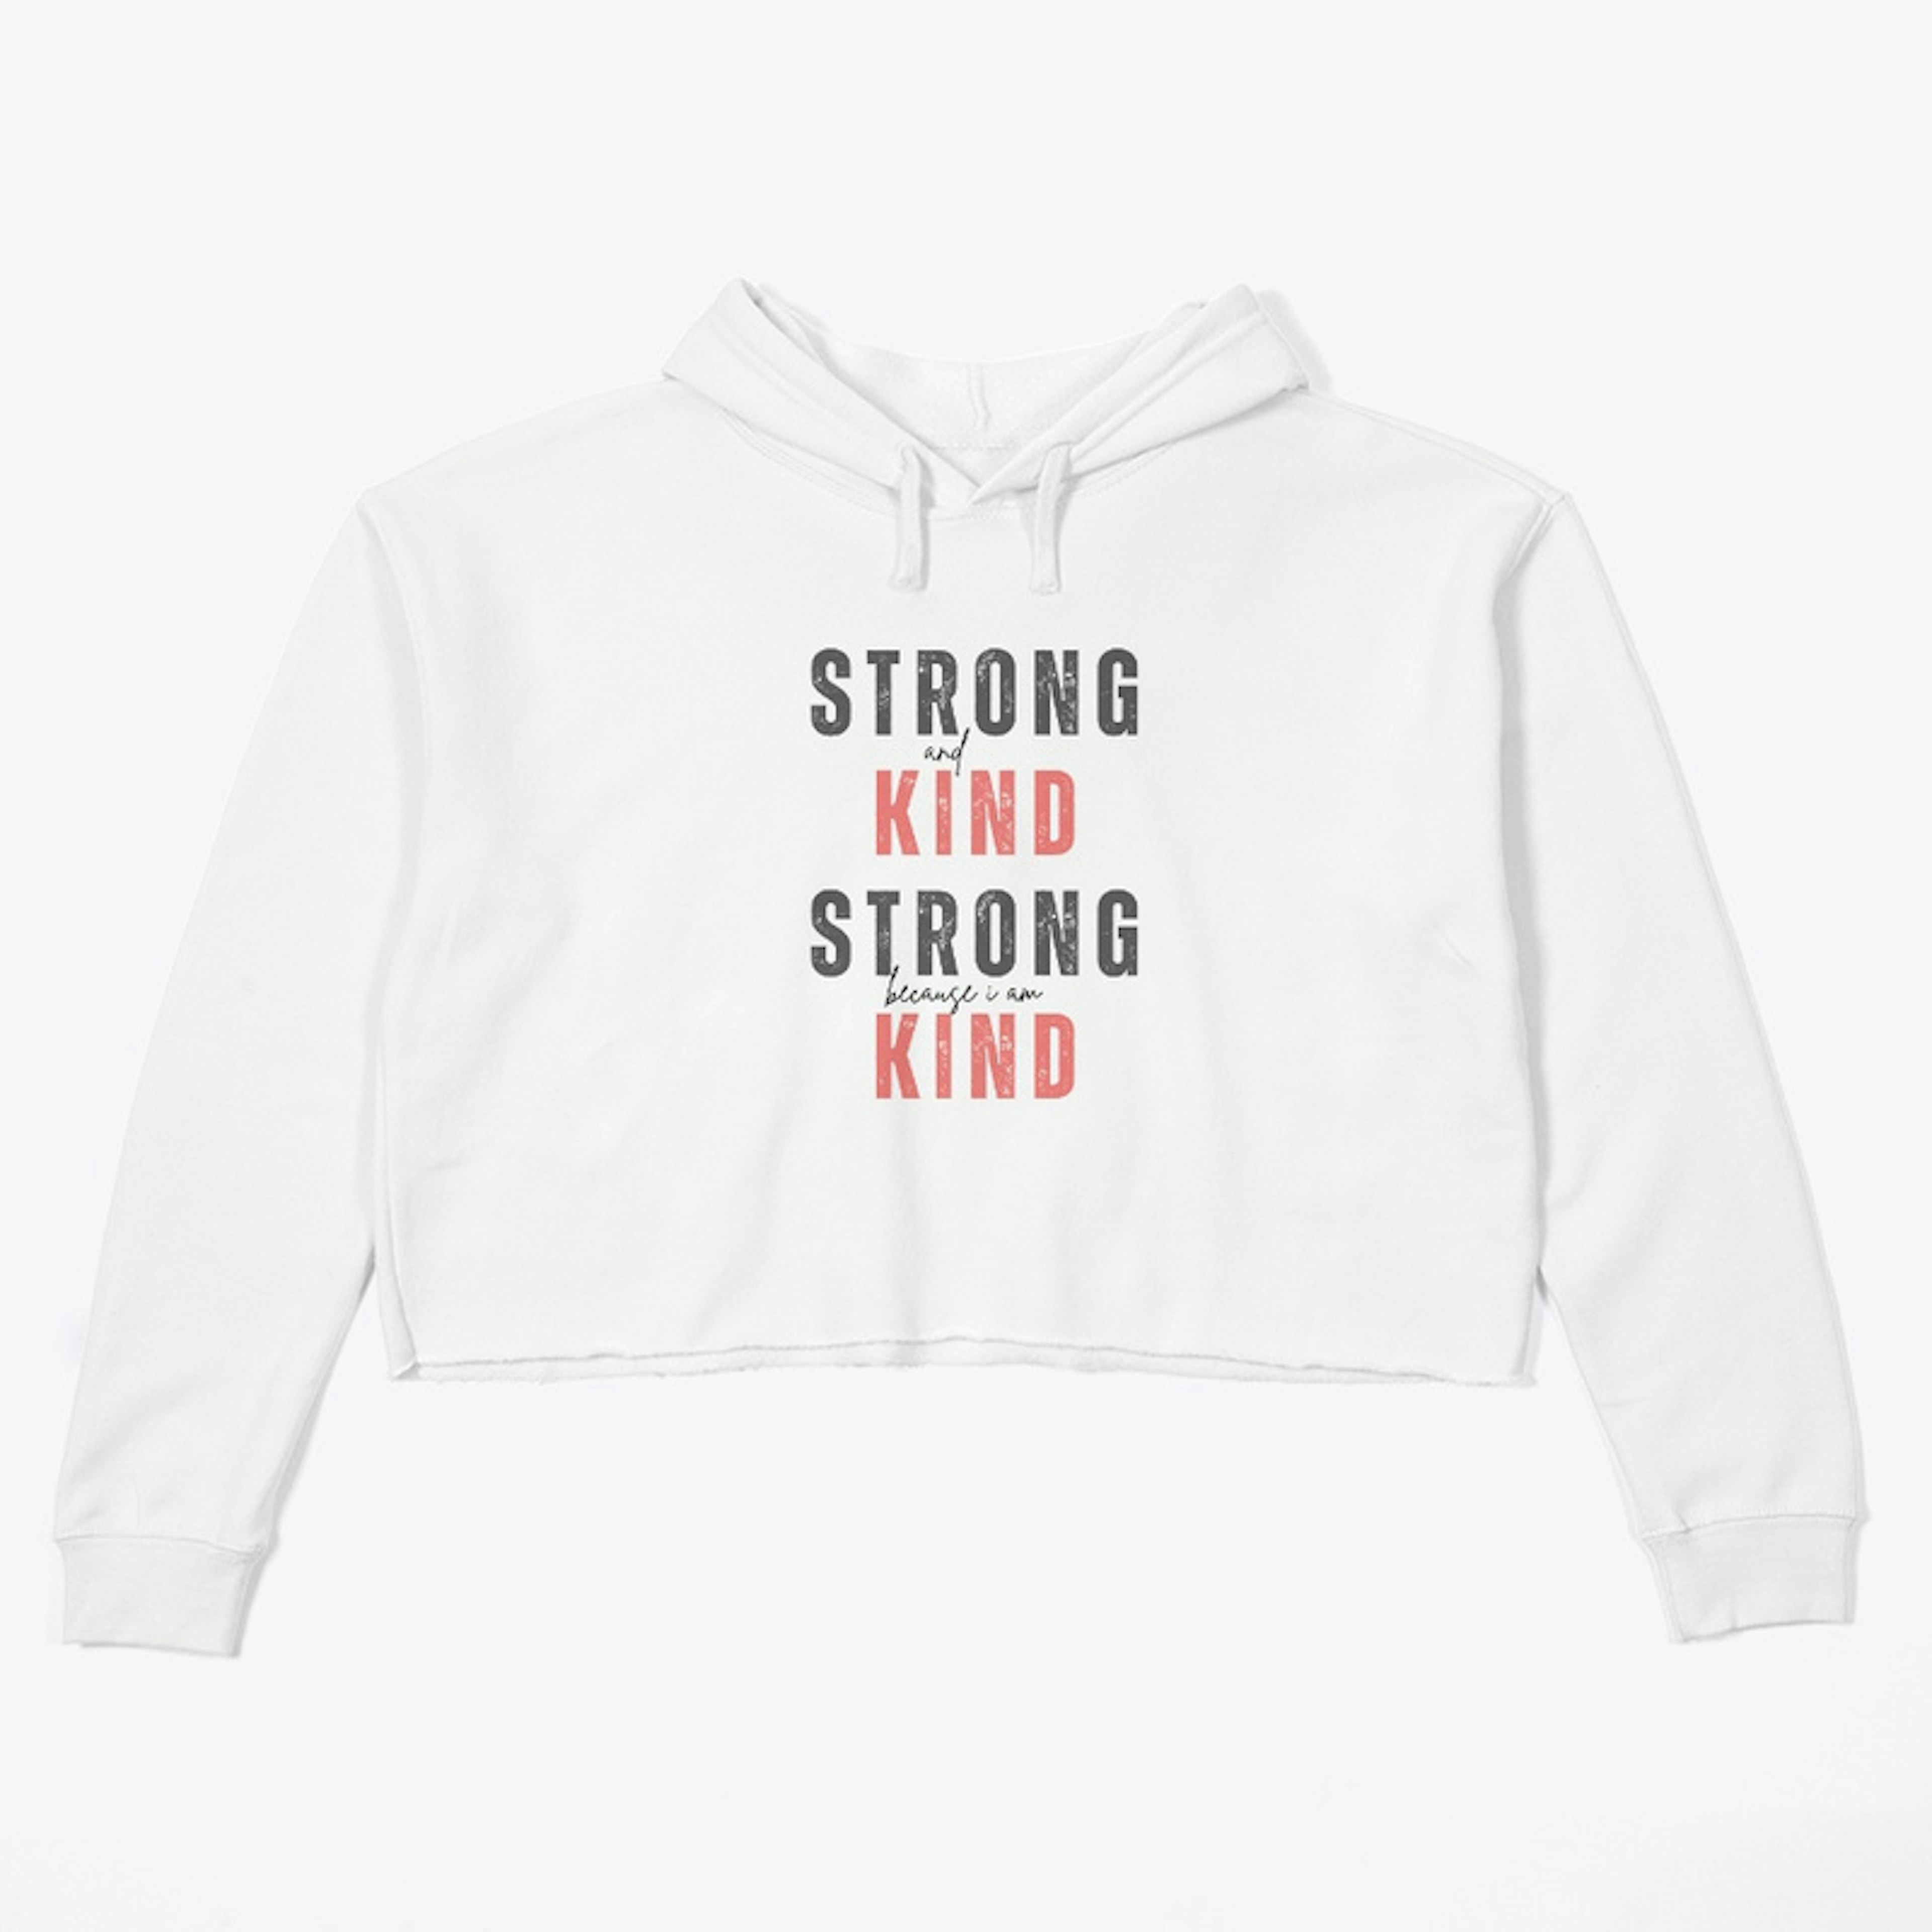 Strong and Kind Women's Cropped Hoodie